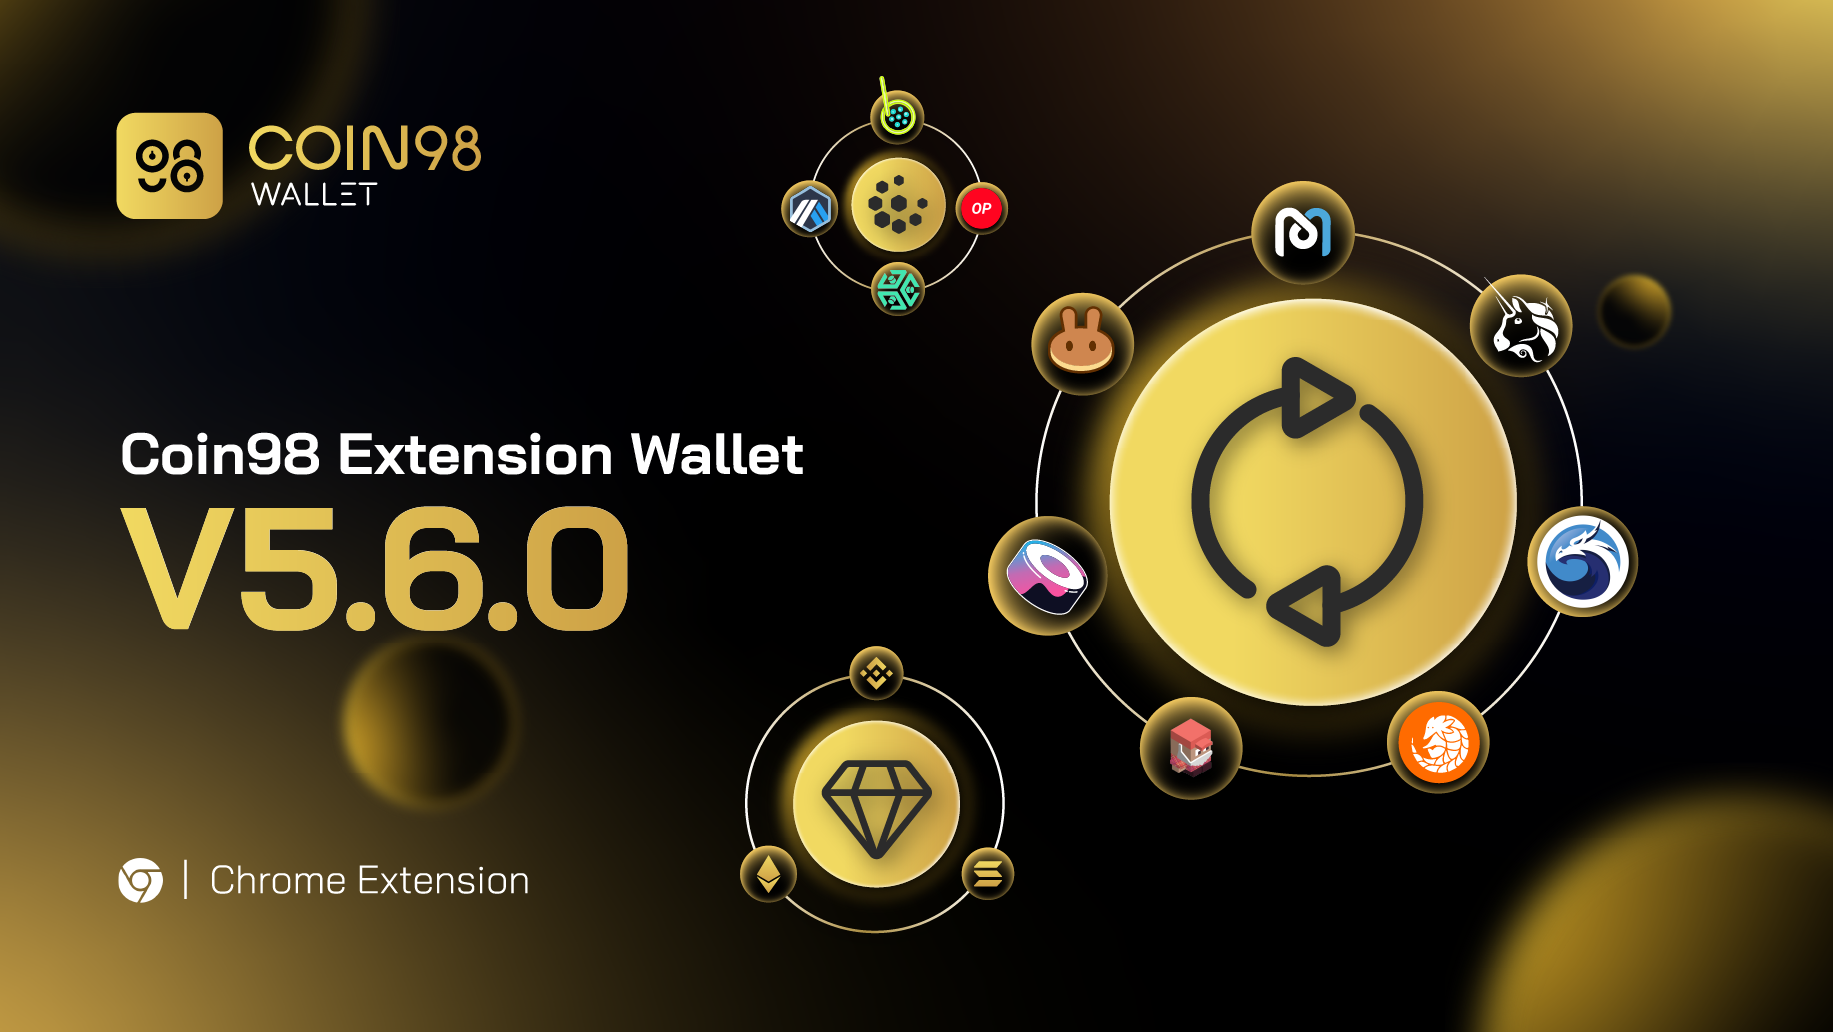 Coin98 Extension Wallet V5.6 is bubbling up with native Swap, NFT support, and more!